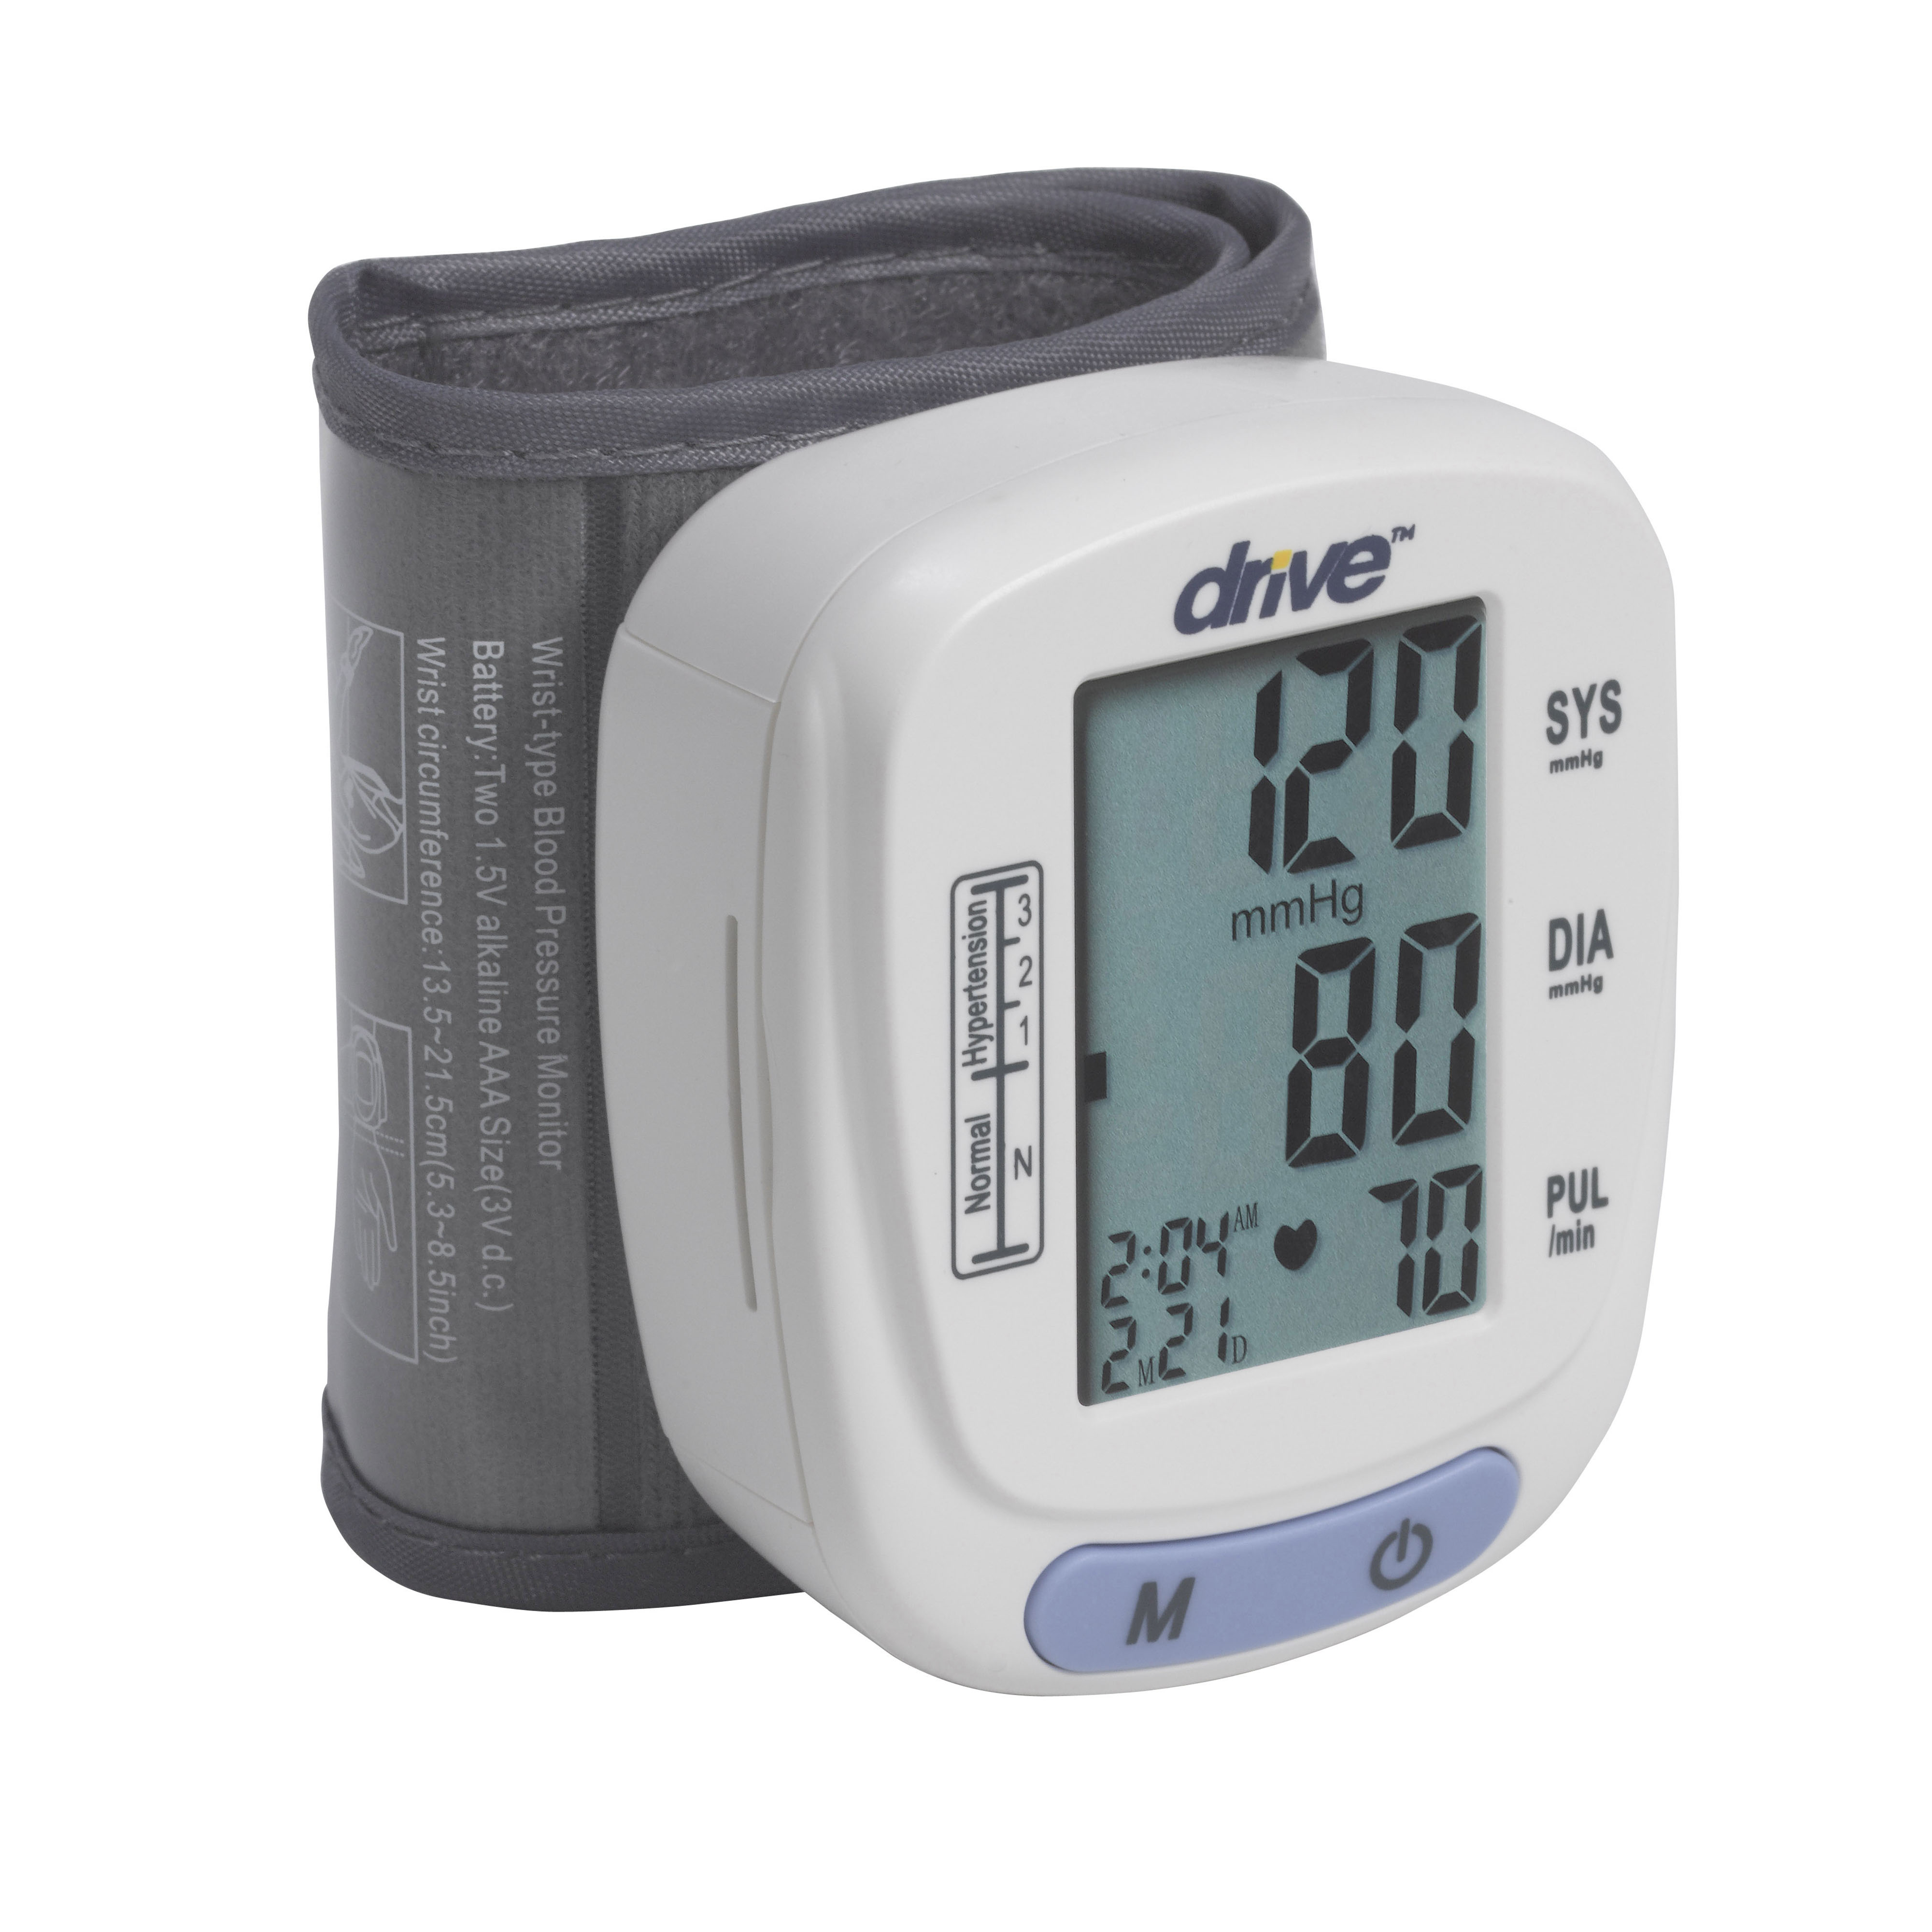 Drive Medical Automatic Blood Pressure Monitor, Wrist Model - image 4 of 7